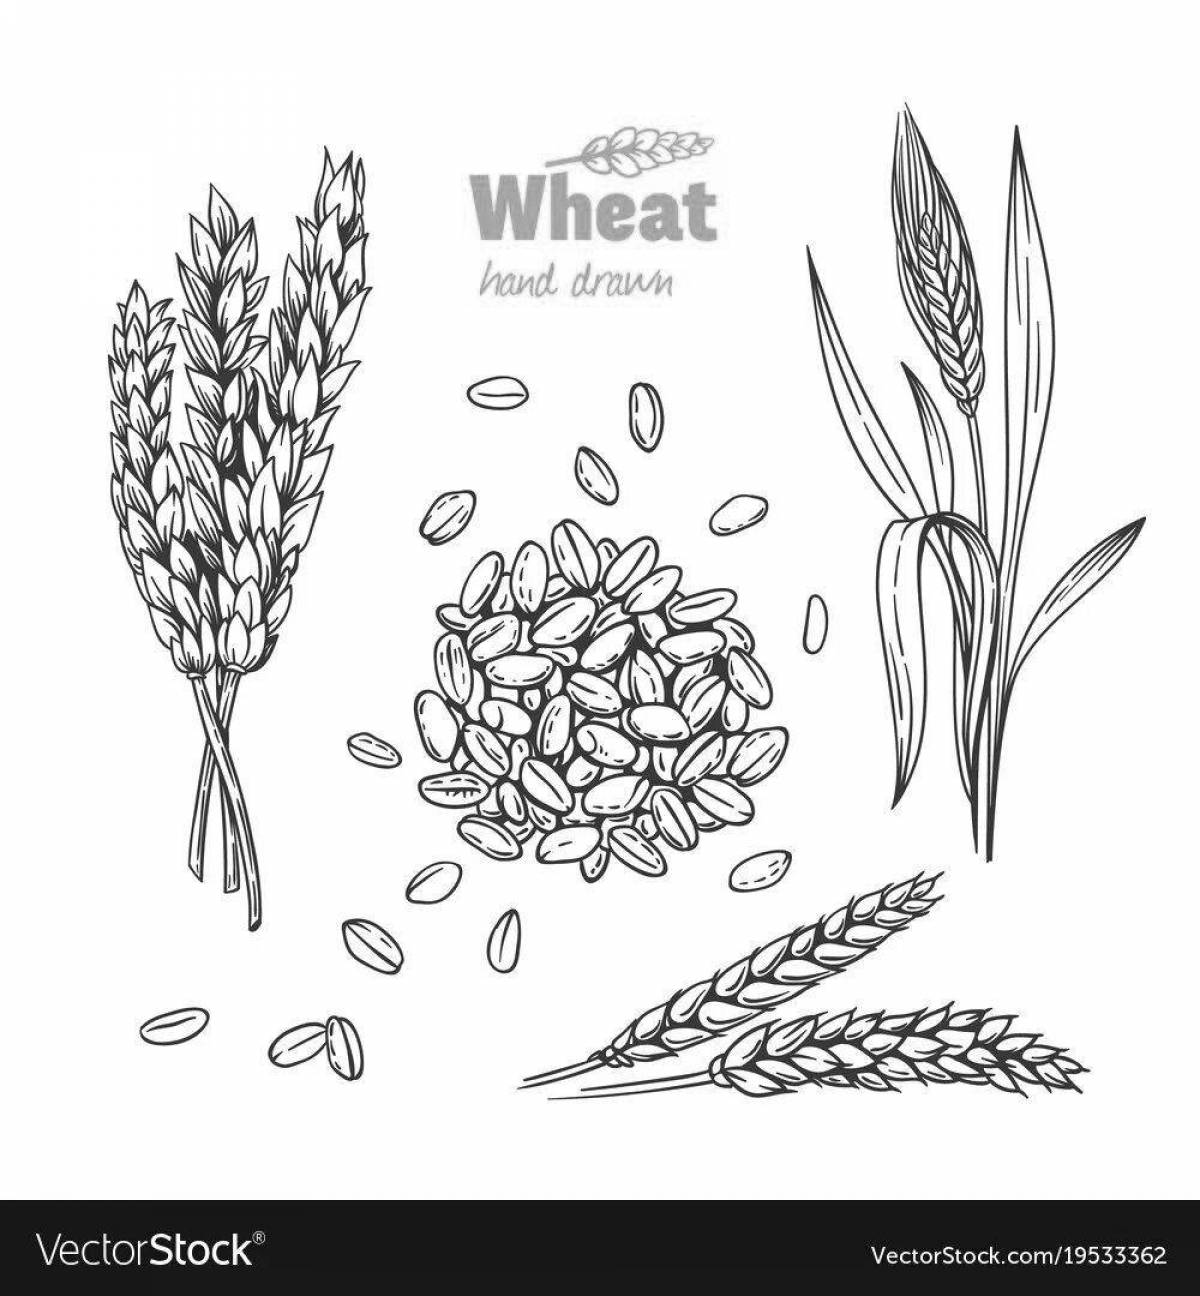 Friendly grain coloring page for kids